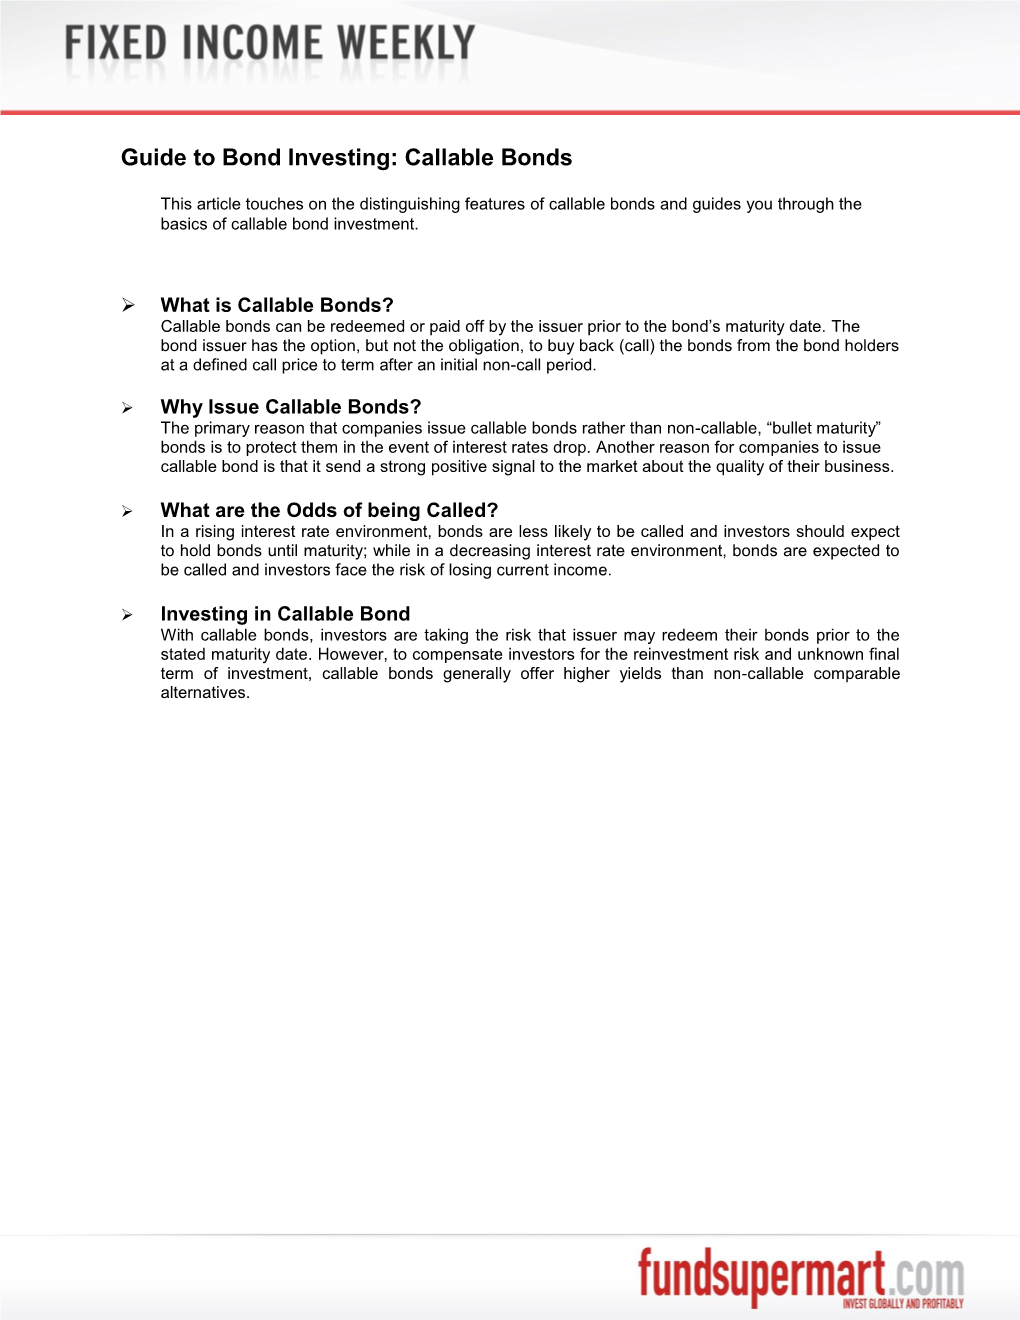 Guide to Bond Investing: Callable Bonds